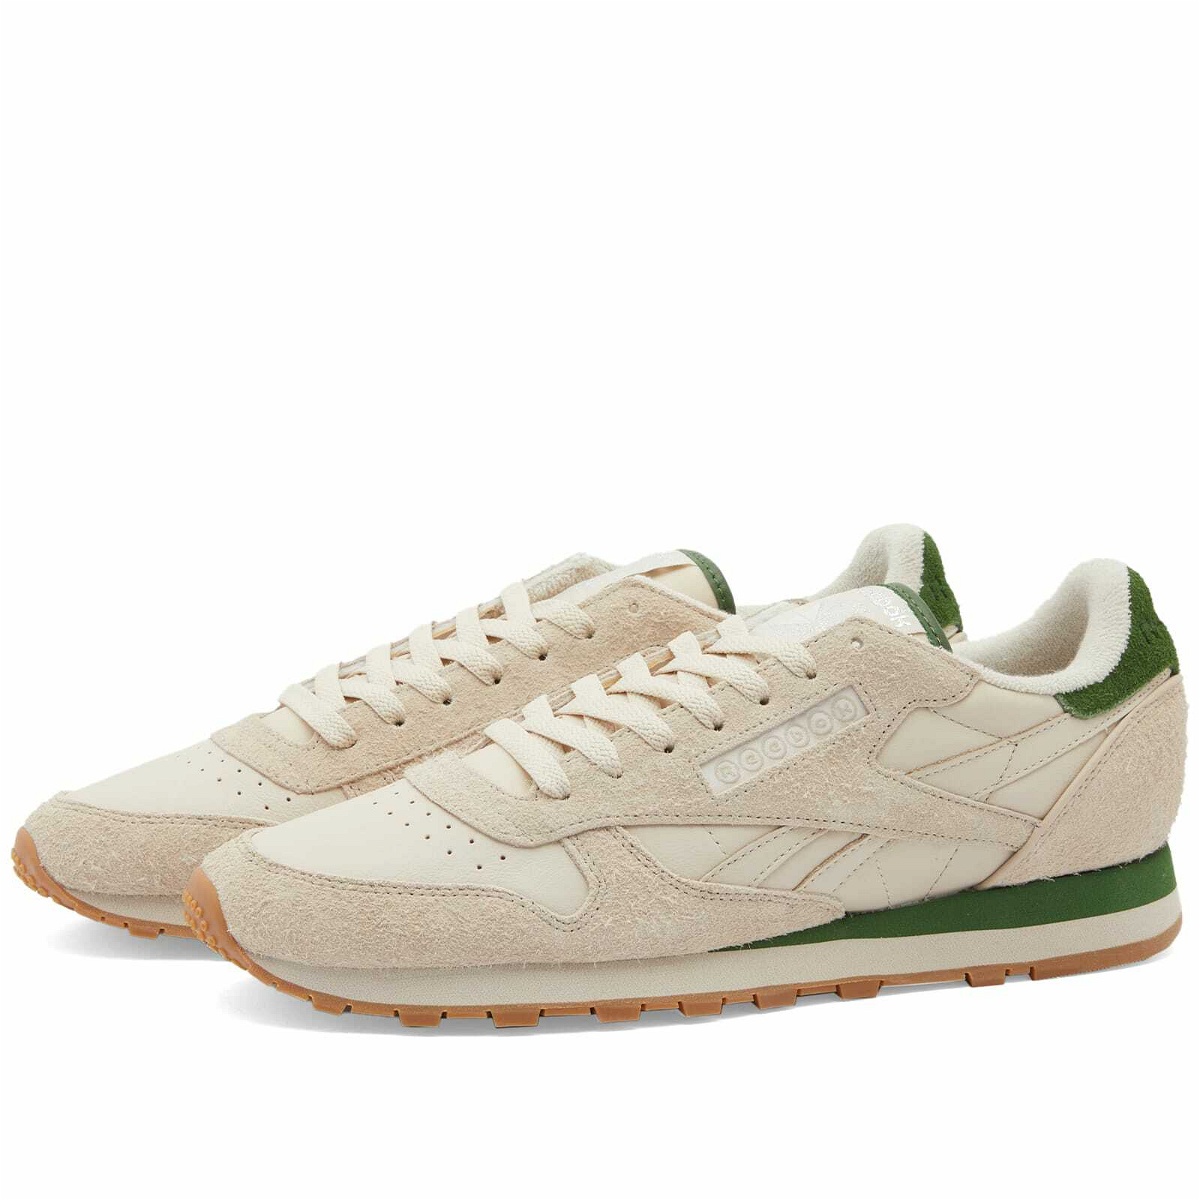 Photo: END. x Reebok Classic Leather ‘Boules Club’ Sneakers in Stucco/Beige